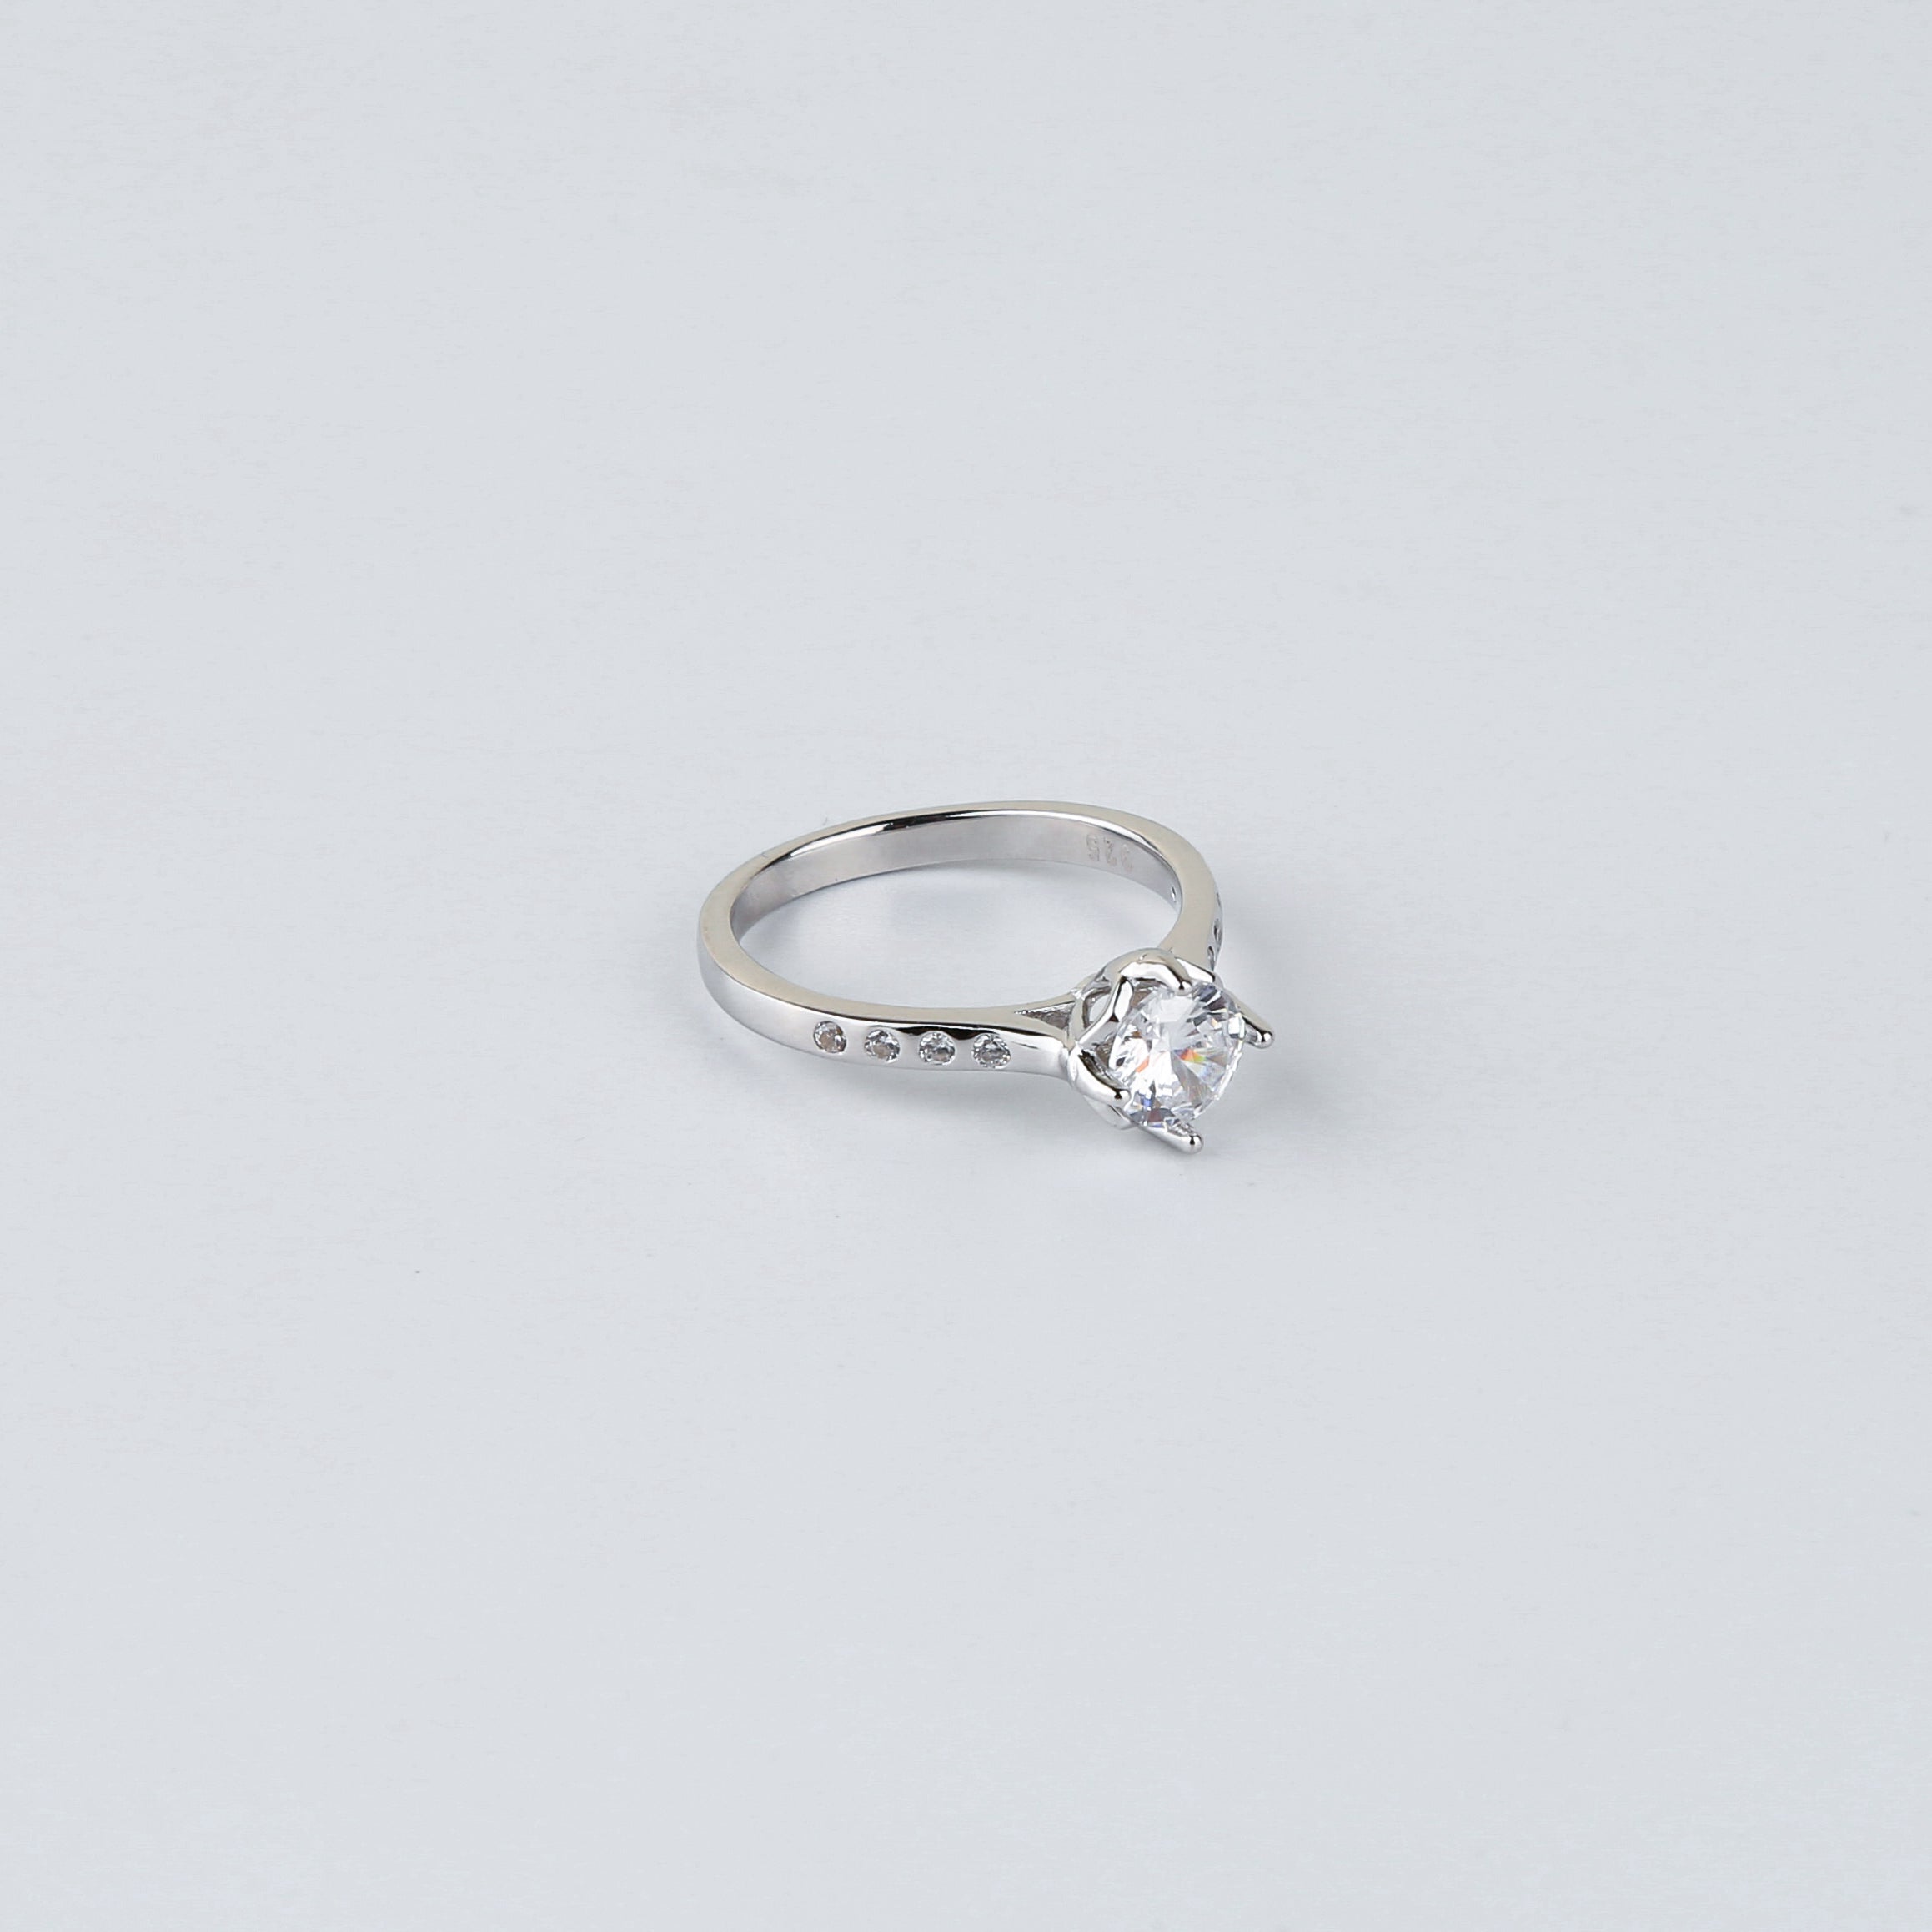 The Span Accent Solitaire Ring